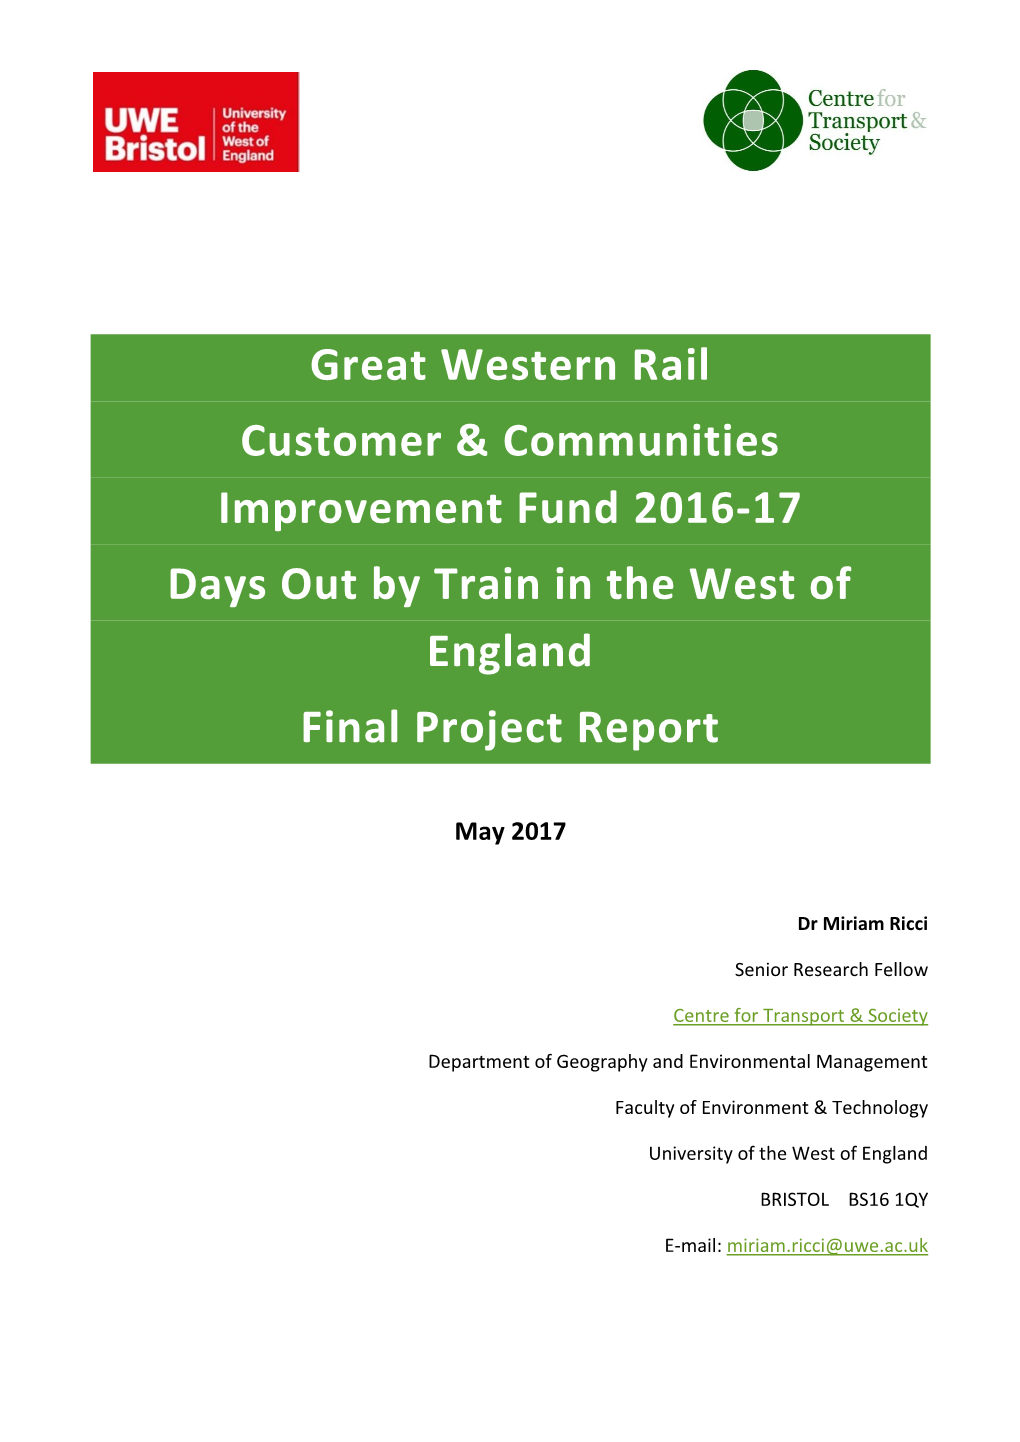 Days out by Train in the West of England Final Project Report